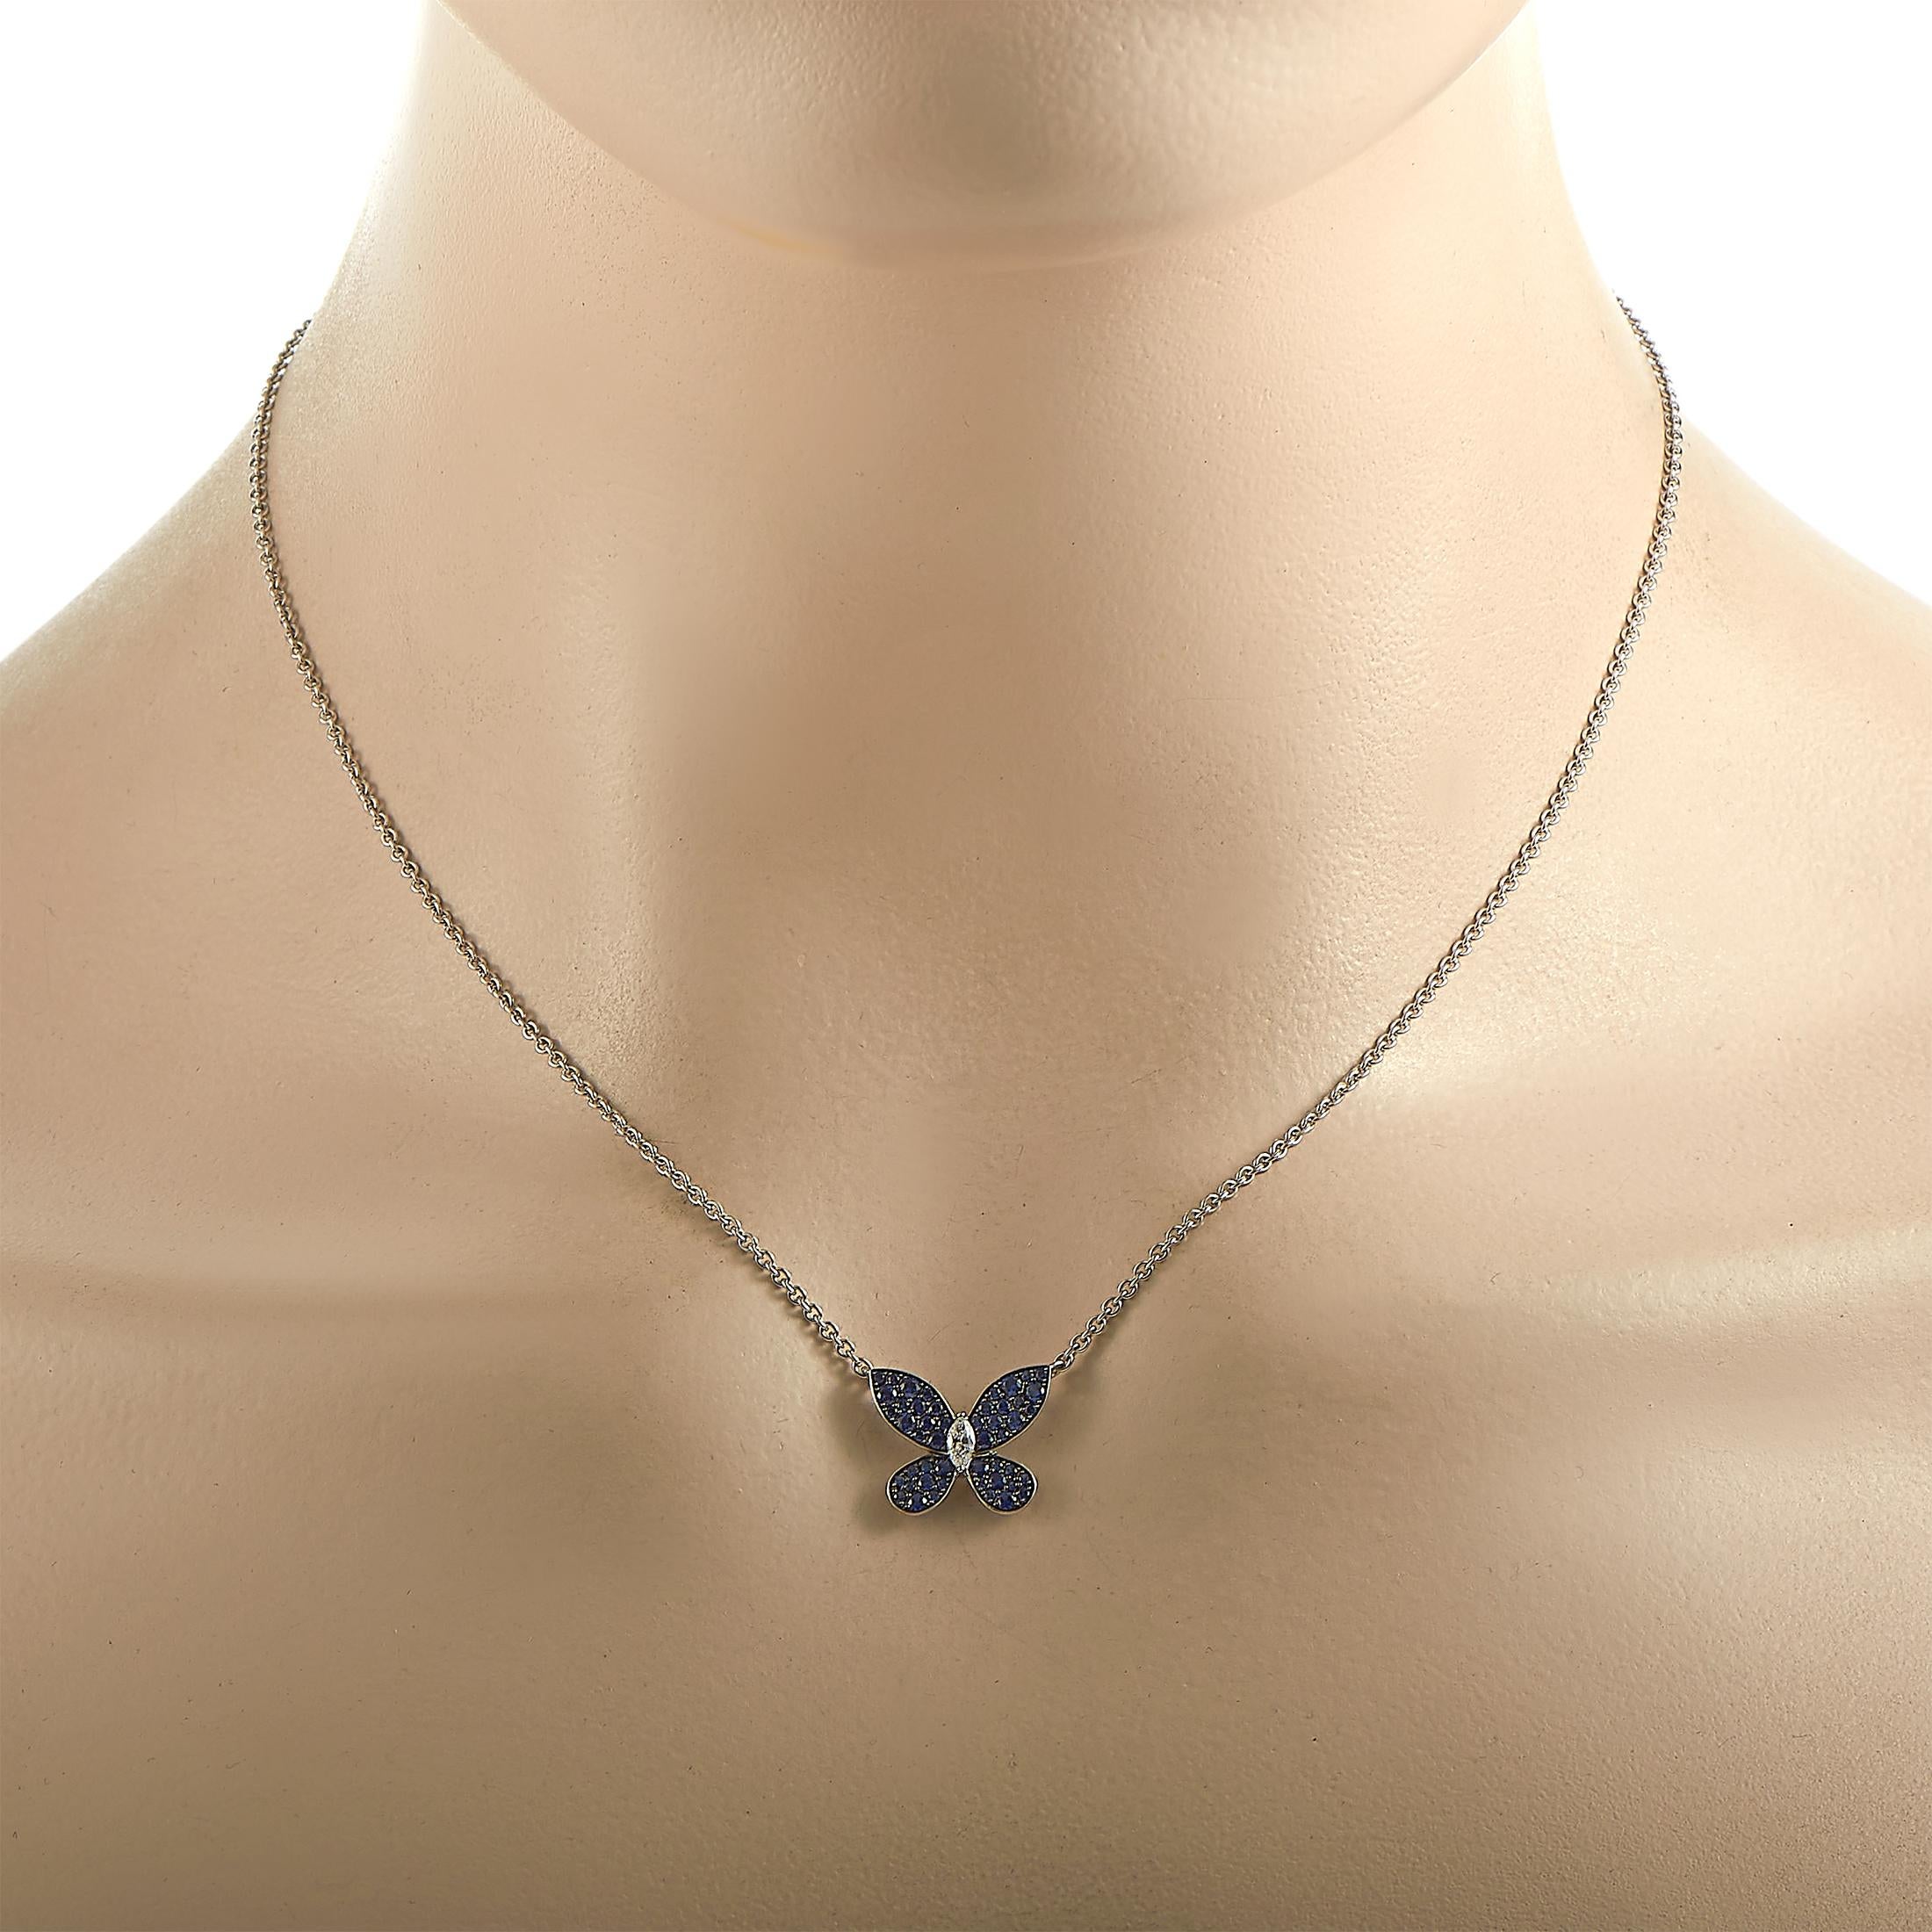 The Graff “Butterfly” necklace is made of 18K white gold and weighs 6 grams. The necklace is presented with a 16” chain onto which a butterfly pendant is attached. The pendant measures 0.55” in length and 0.65” in width and is embellished with